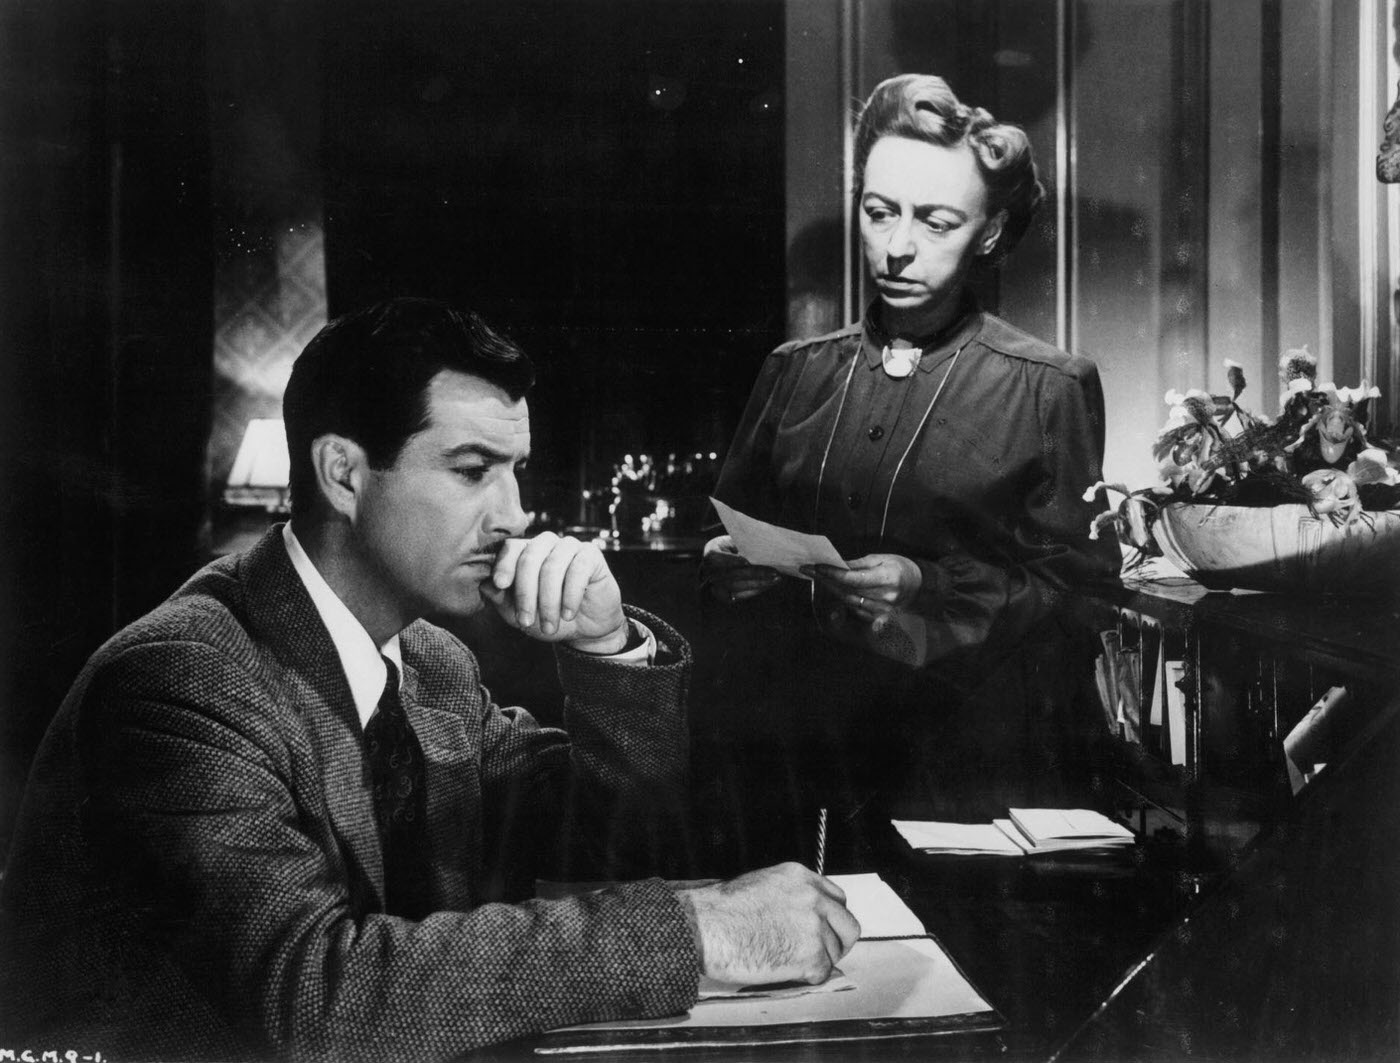 Robert Taylor writing as an unidentified woman looks at him in a scene from the film 'Conspirator', 1949.